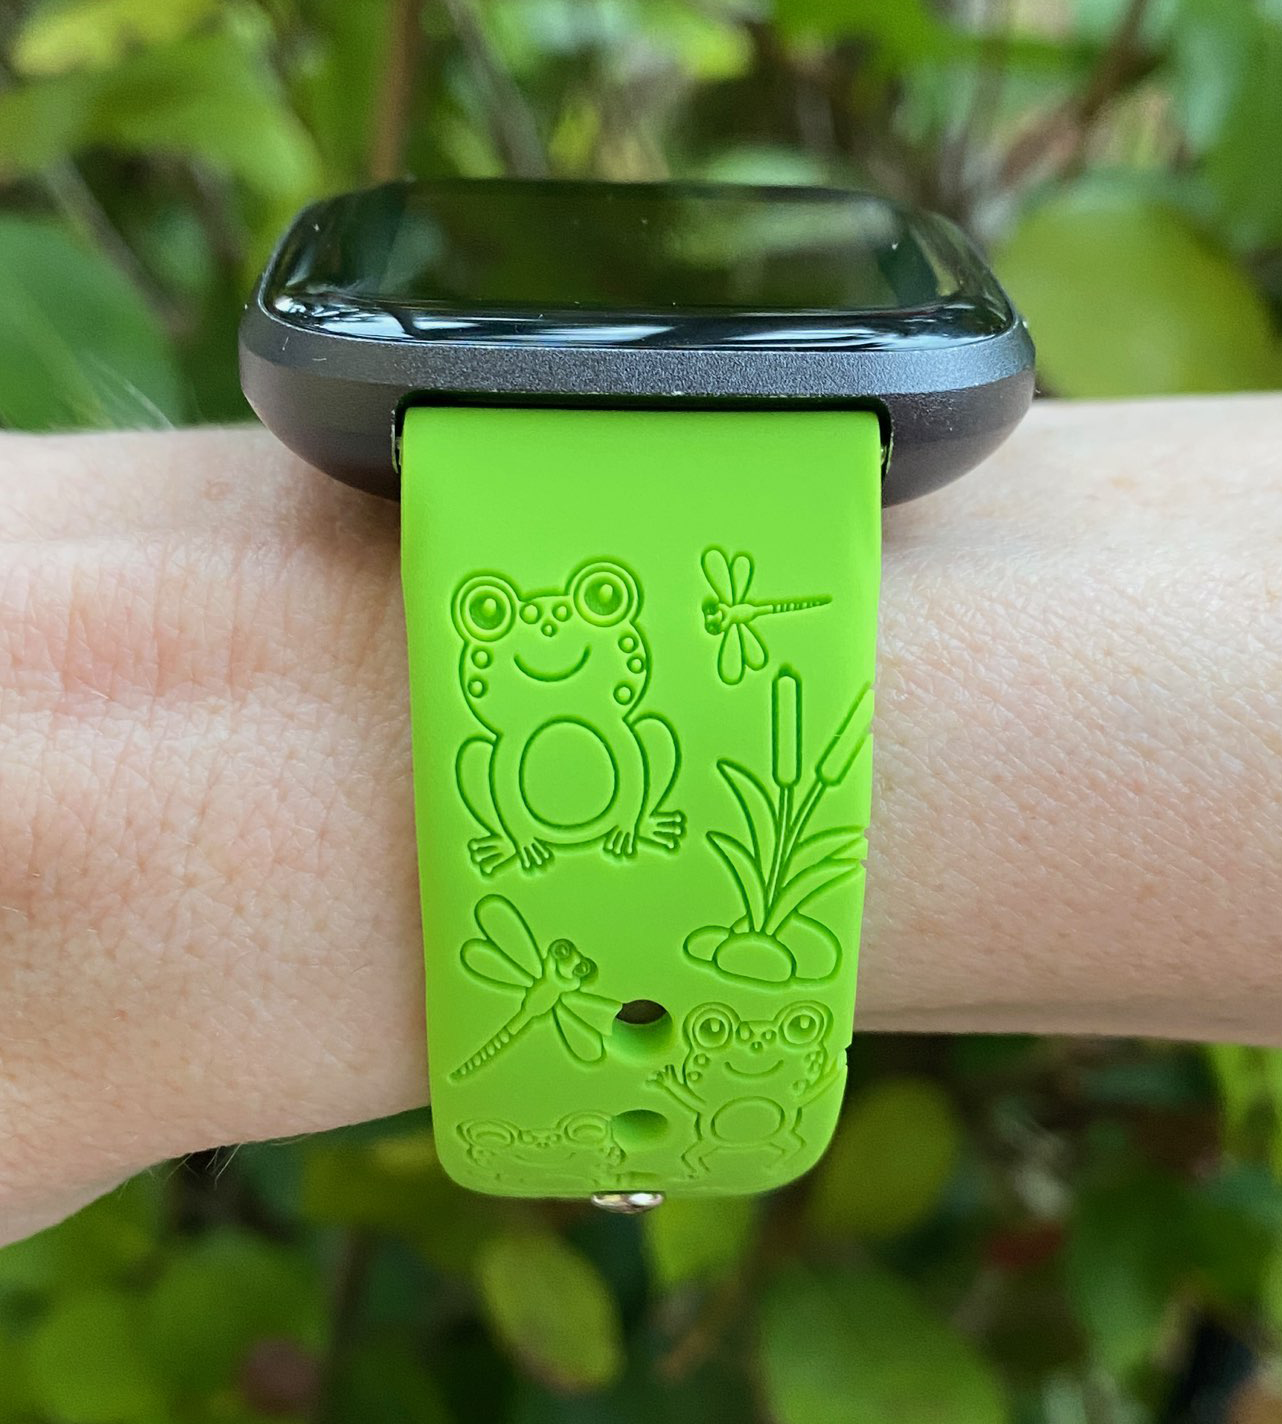 Frog Fitbit Versa 1/2 Watch Band